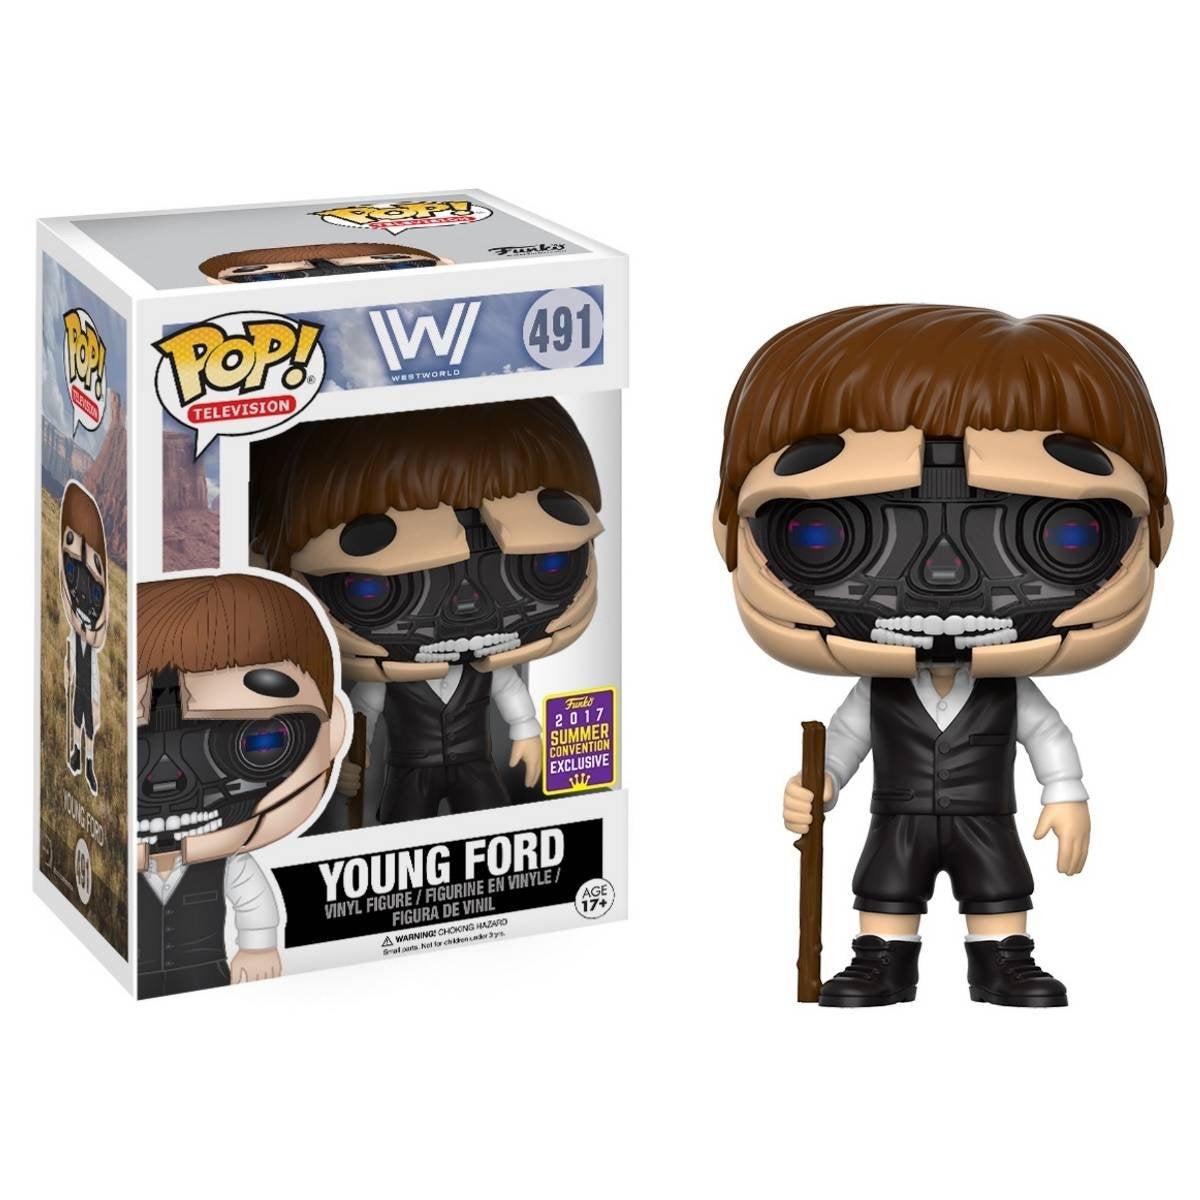 Westworld: Young Ford (2017 Summer Convention) Funko Pop! Vinyl